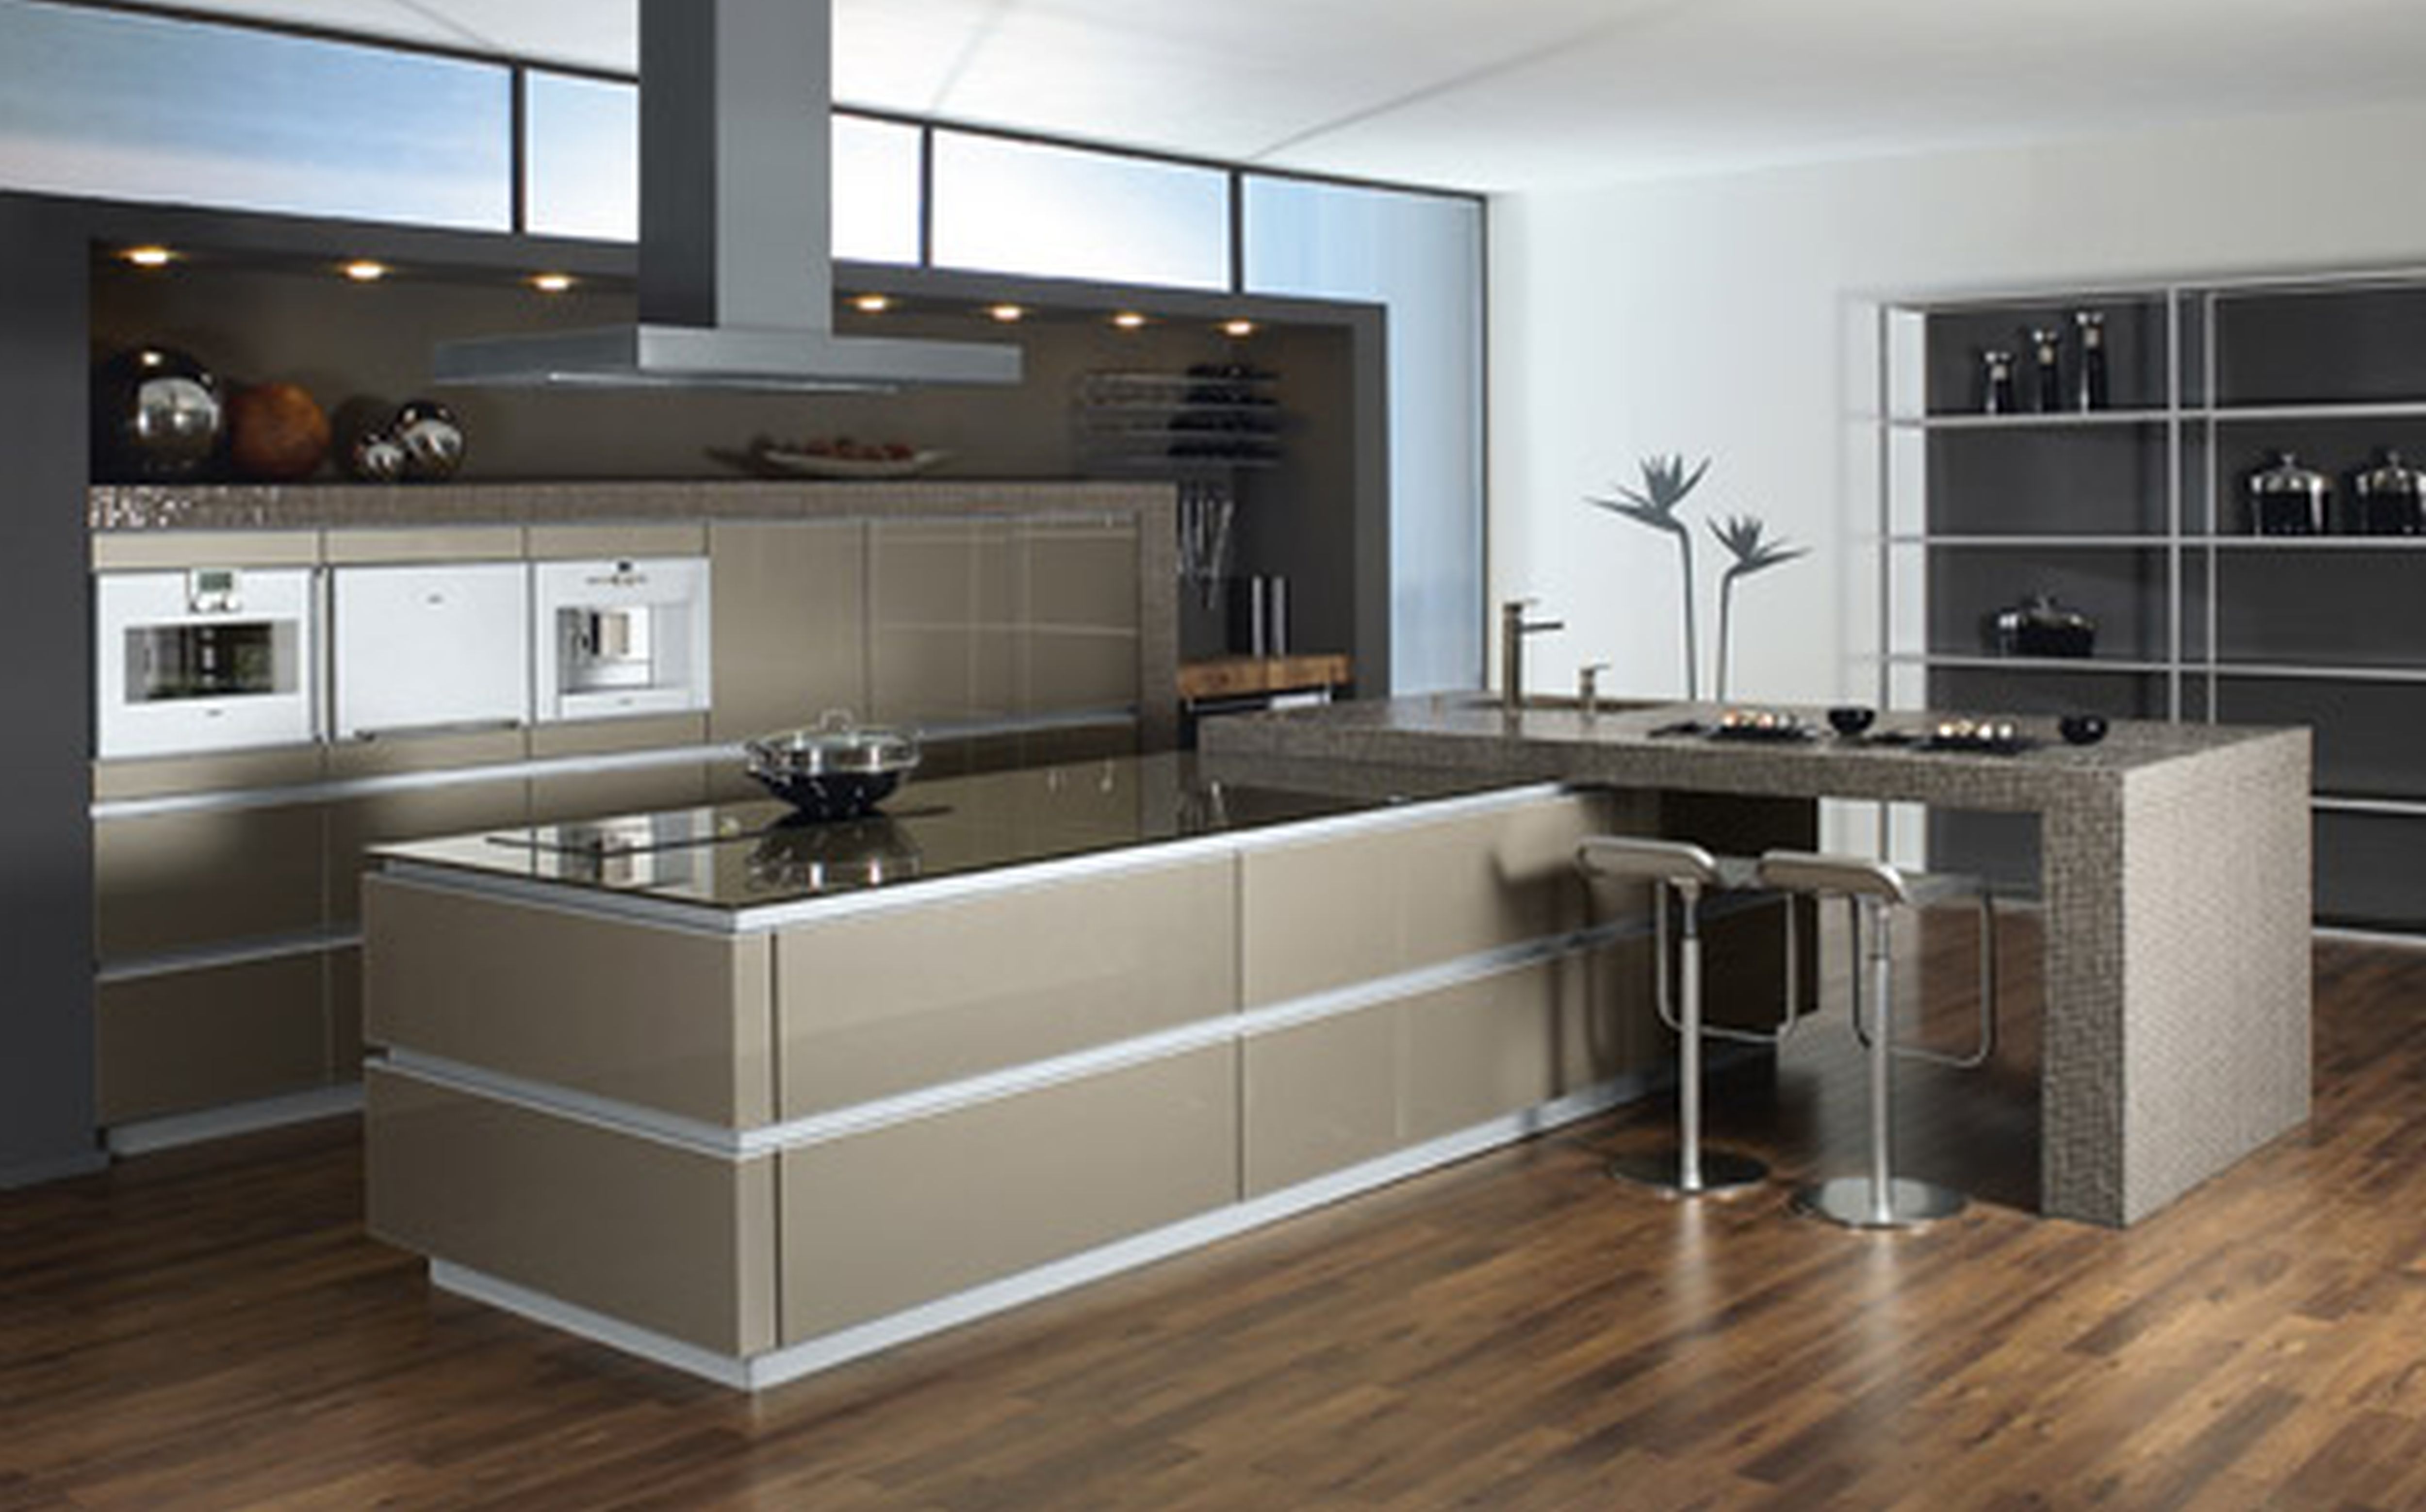 modern-kitchen-cabinets-2015-as-modern-kitchen-cabinet-with-appealing-design-ideas-which-gives-a-natural-sensation-for-comfort-of-Kitchen-191